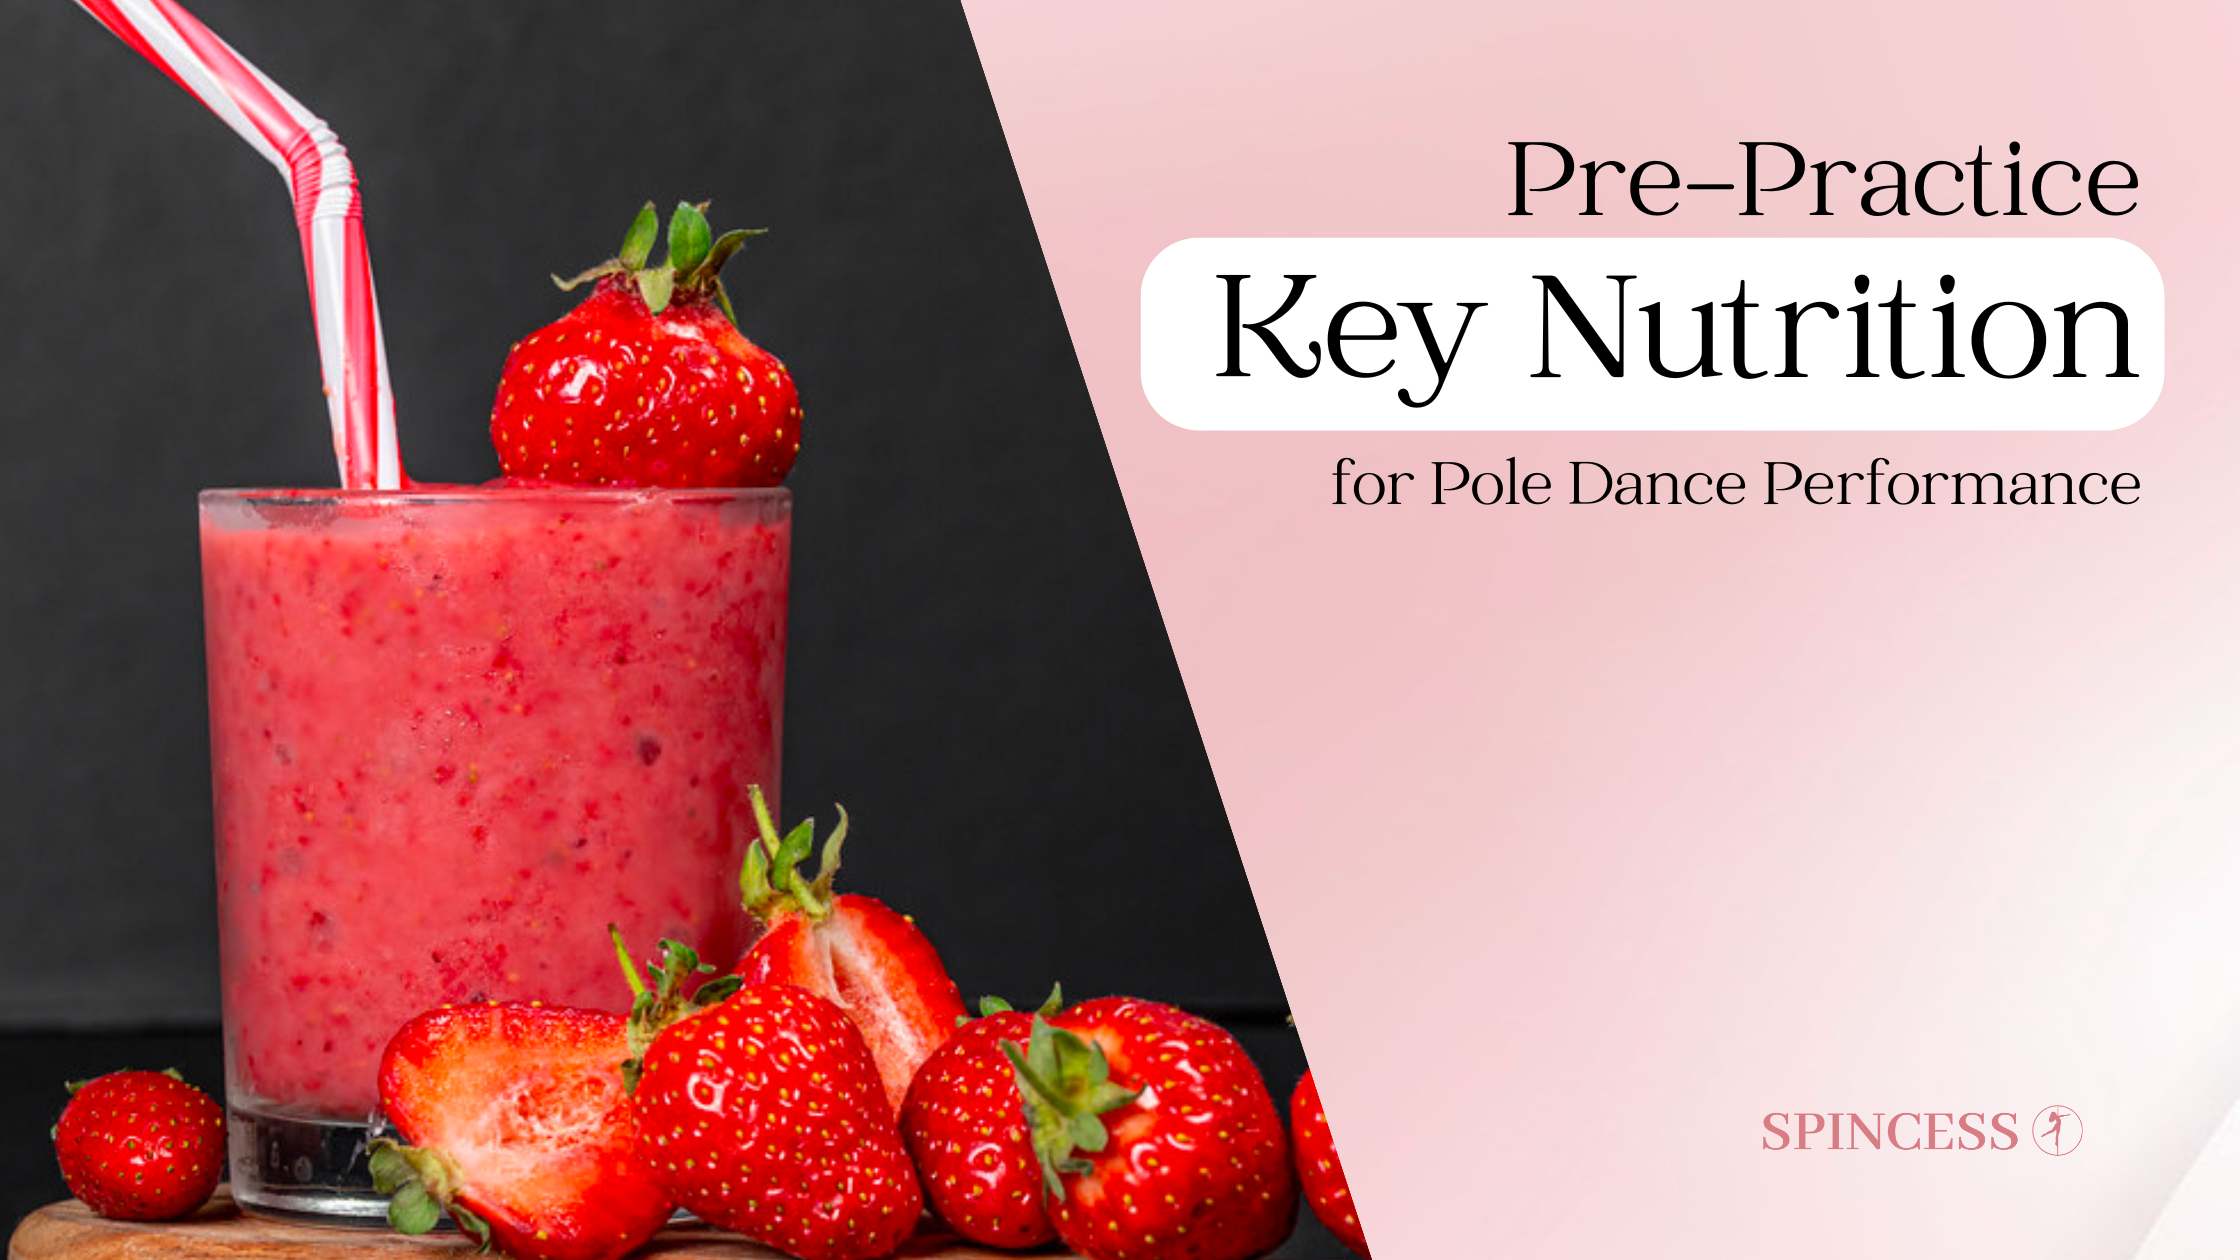 Pole Dance Performance: What to Eat Before Practice